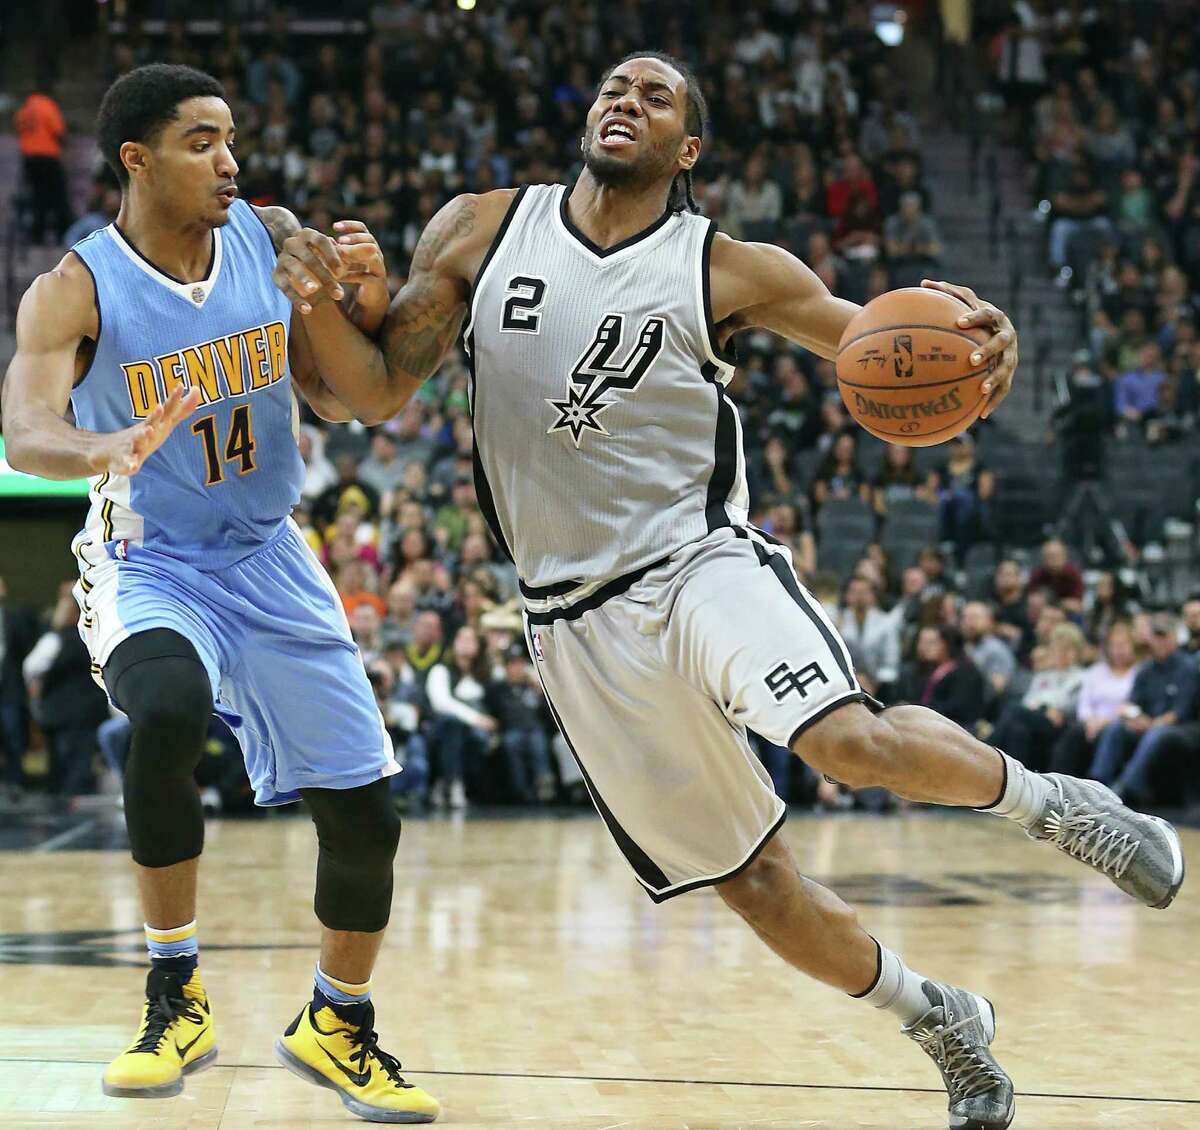 Kawhi Leonard tries a Manu style bump against Gary Harris as the Spurs host the Denver Nuggets at the AT&T Center on December 27, 2015.